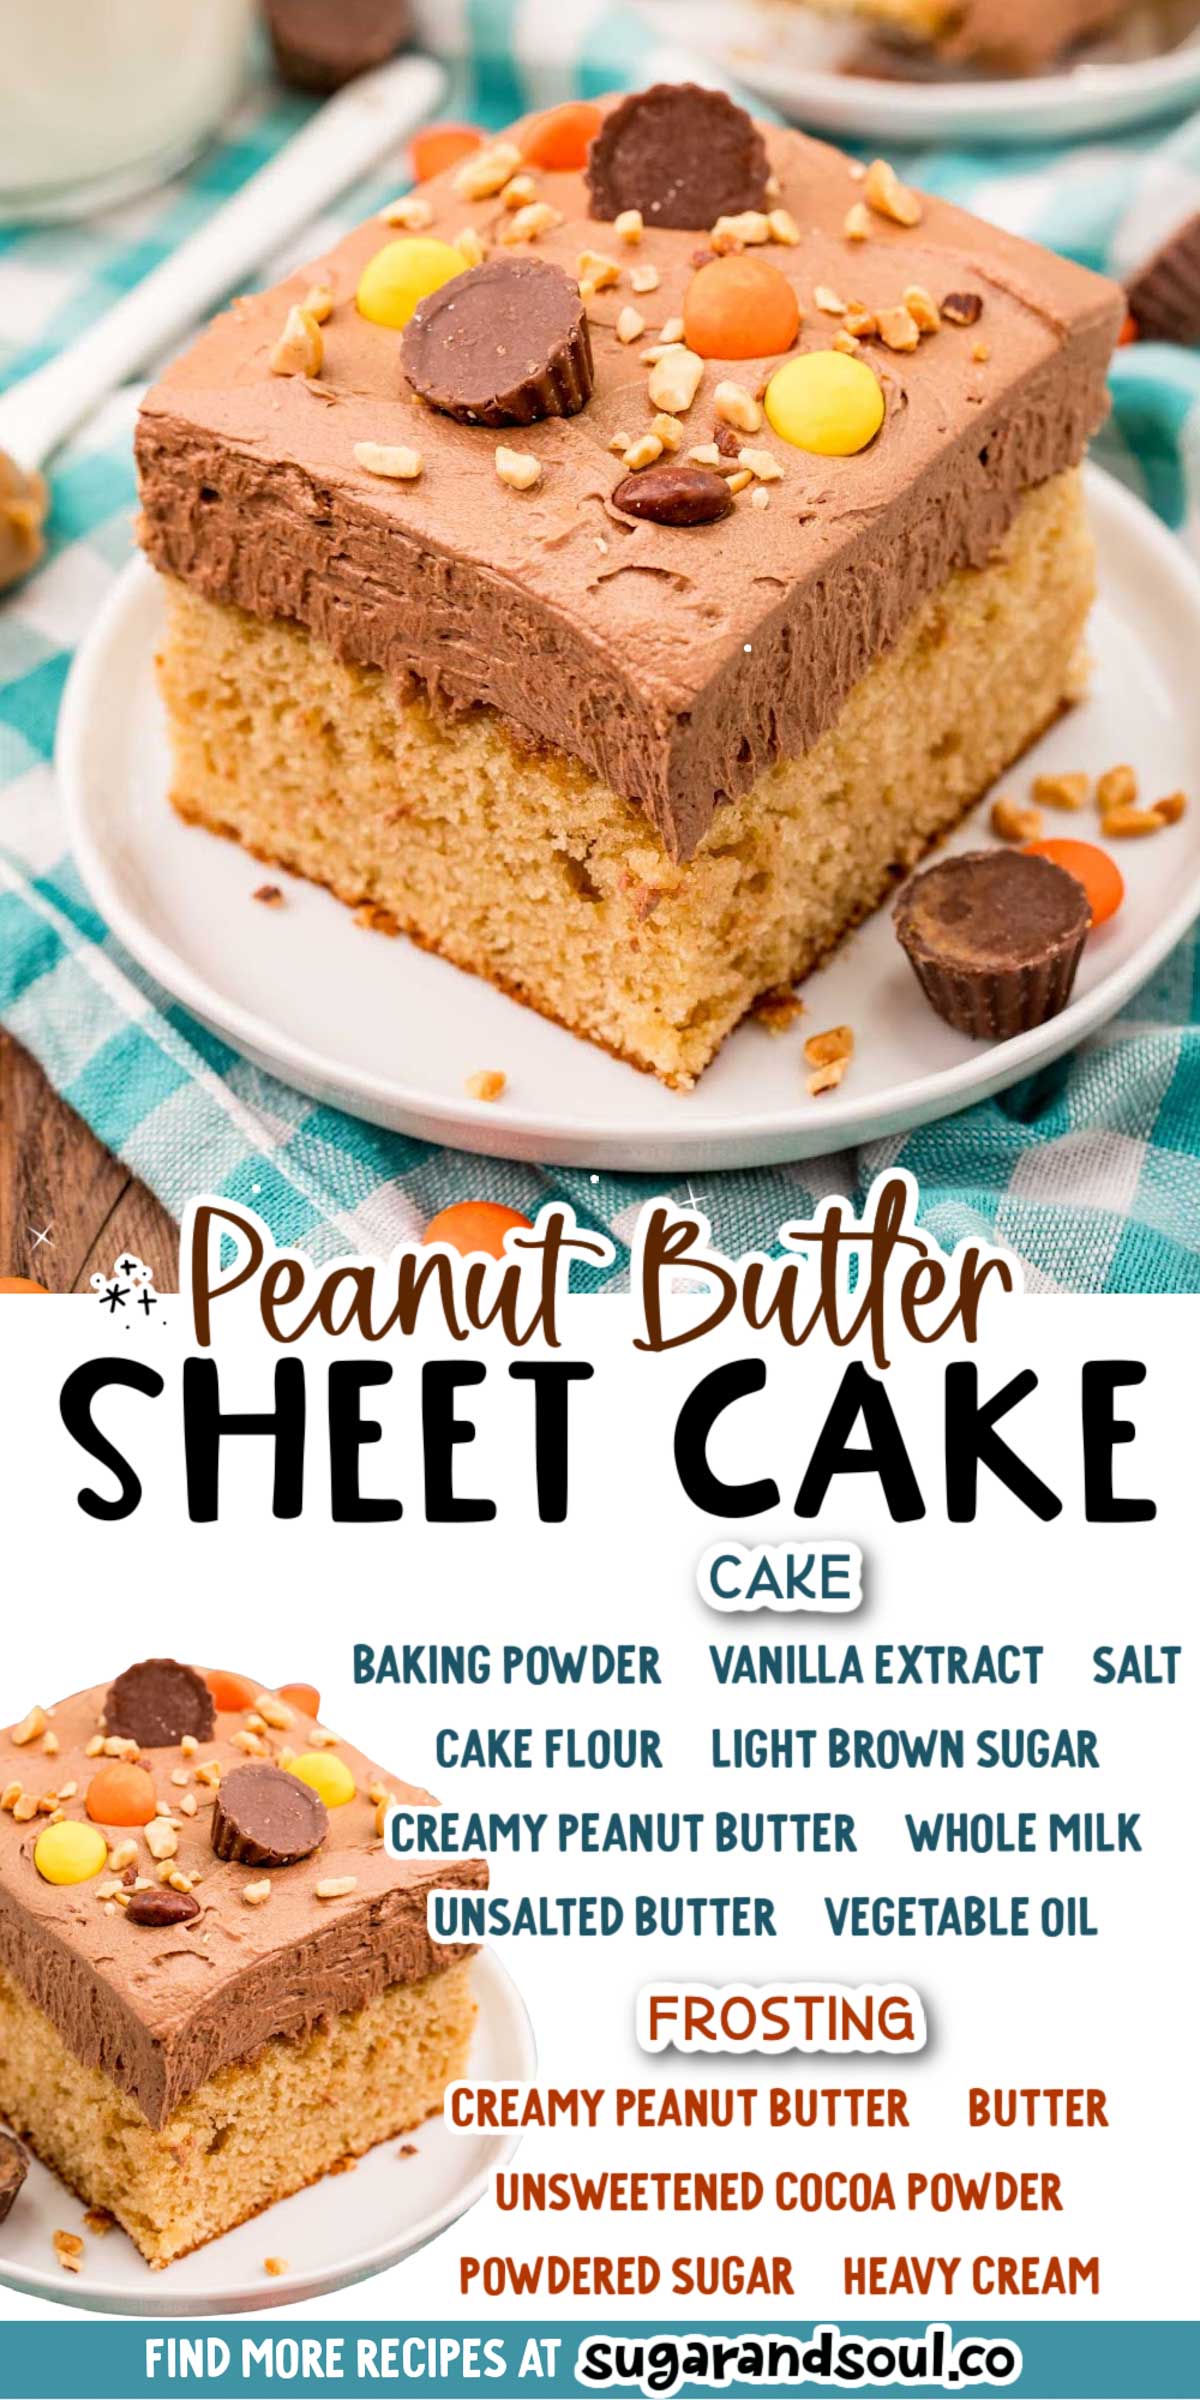 This Peanut Butter Sheet Cake is covered in a sweet peanut butter chocolate frosting then topped with chopped nuts and peanut butter candy! Pull this dense yet tender cake out of the oven after only 30 minutes of baking! via @sugarandsoulco